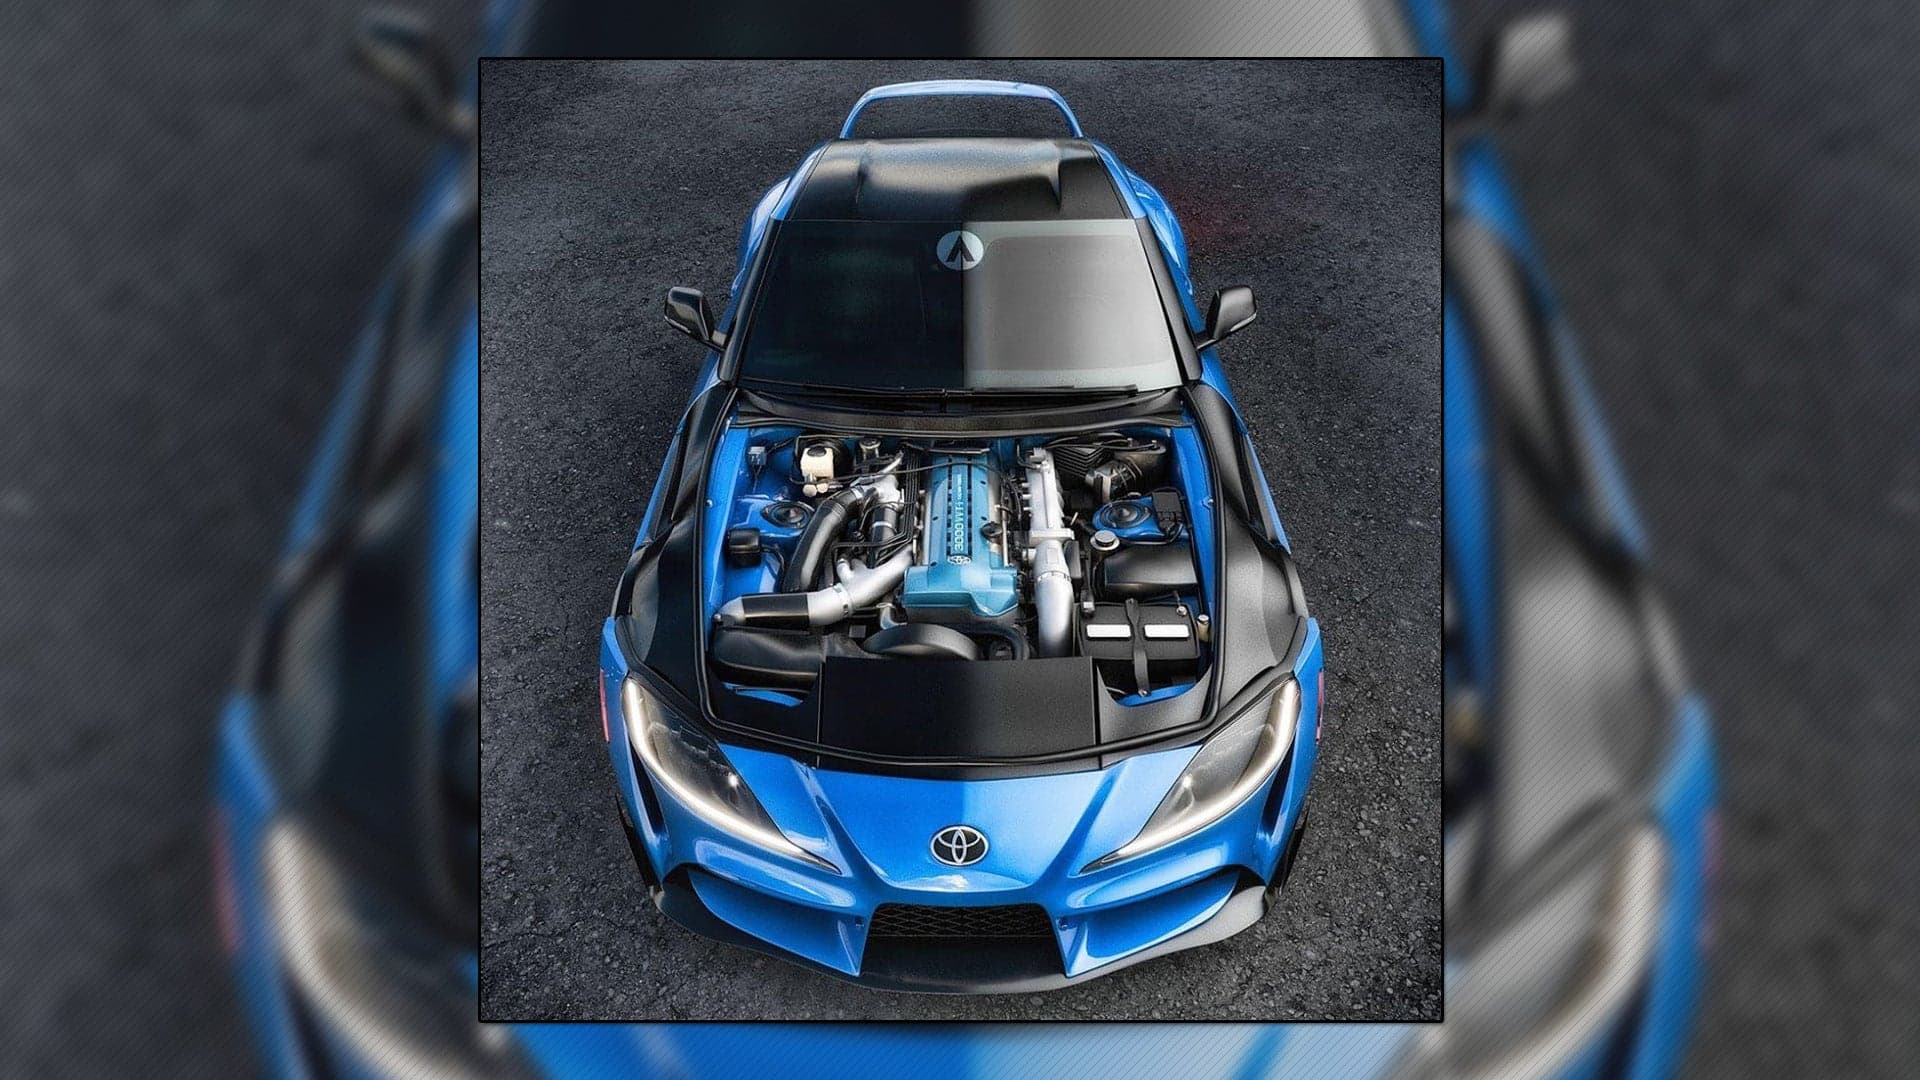 Good News: There’s Already a 2JZ Swap Kit in the Works for the New Toyota Supra